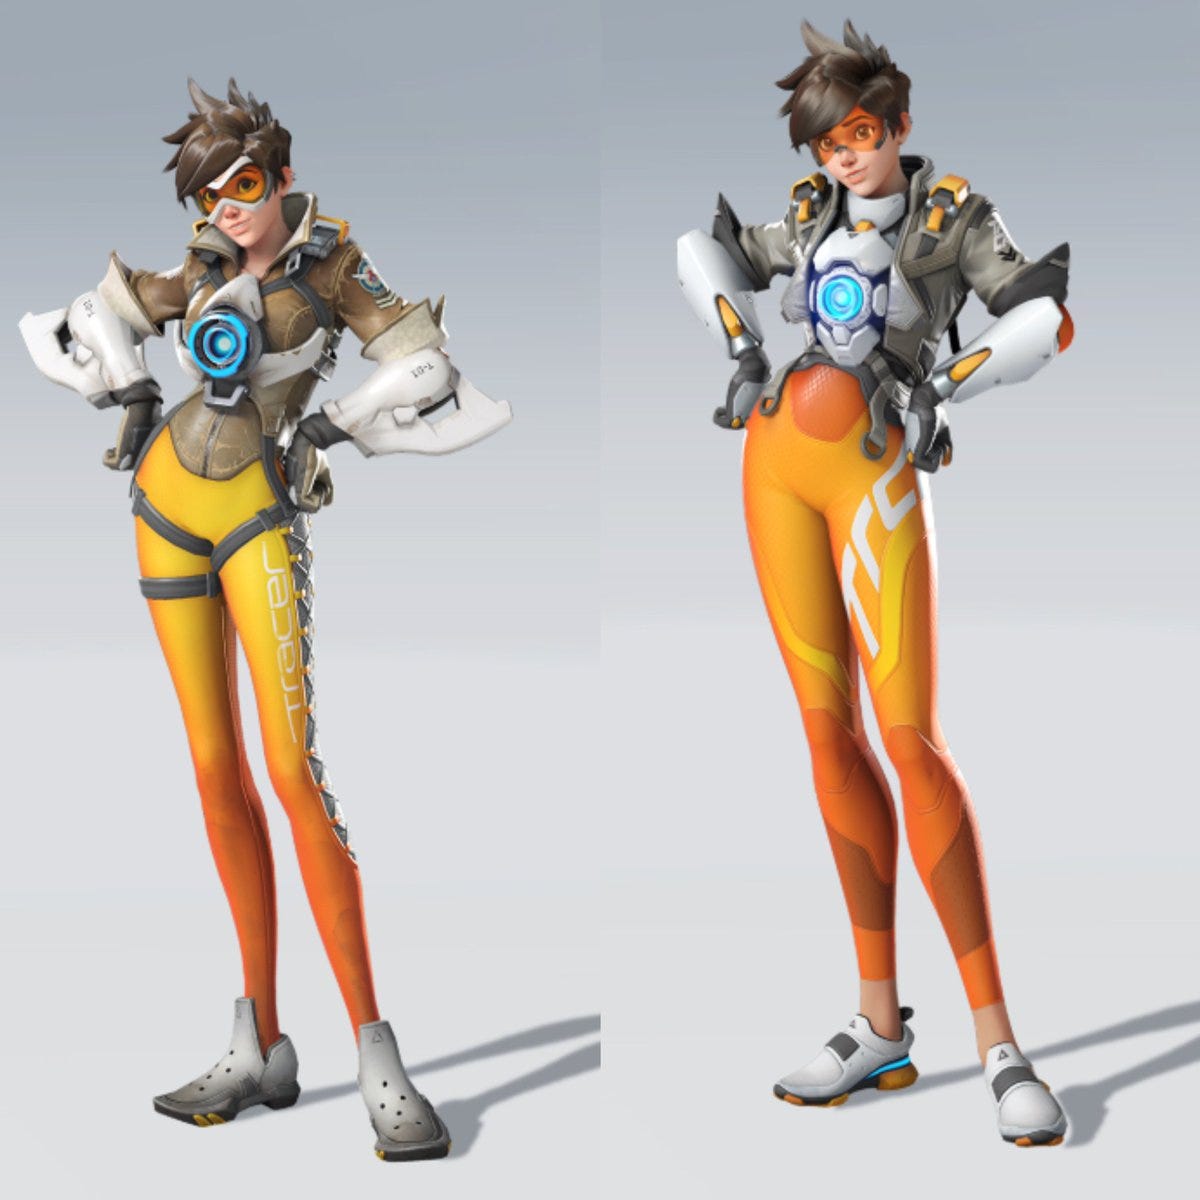 Overwatch collection